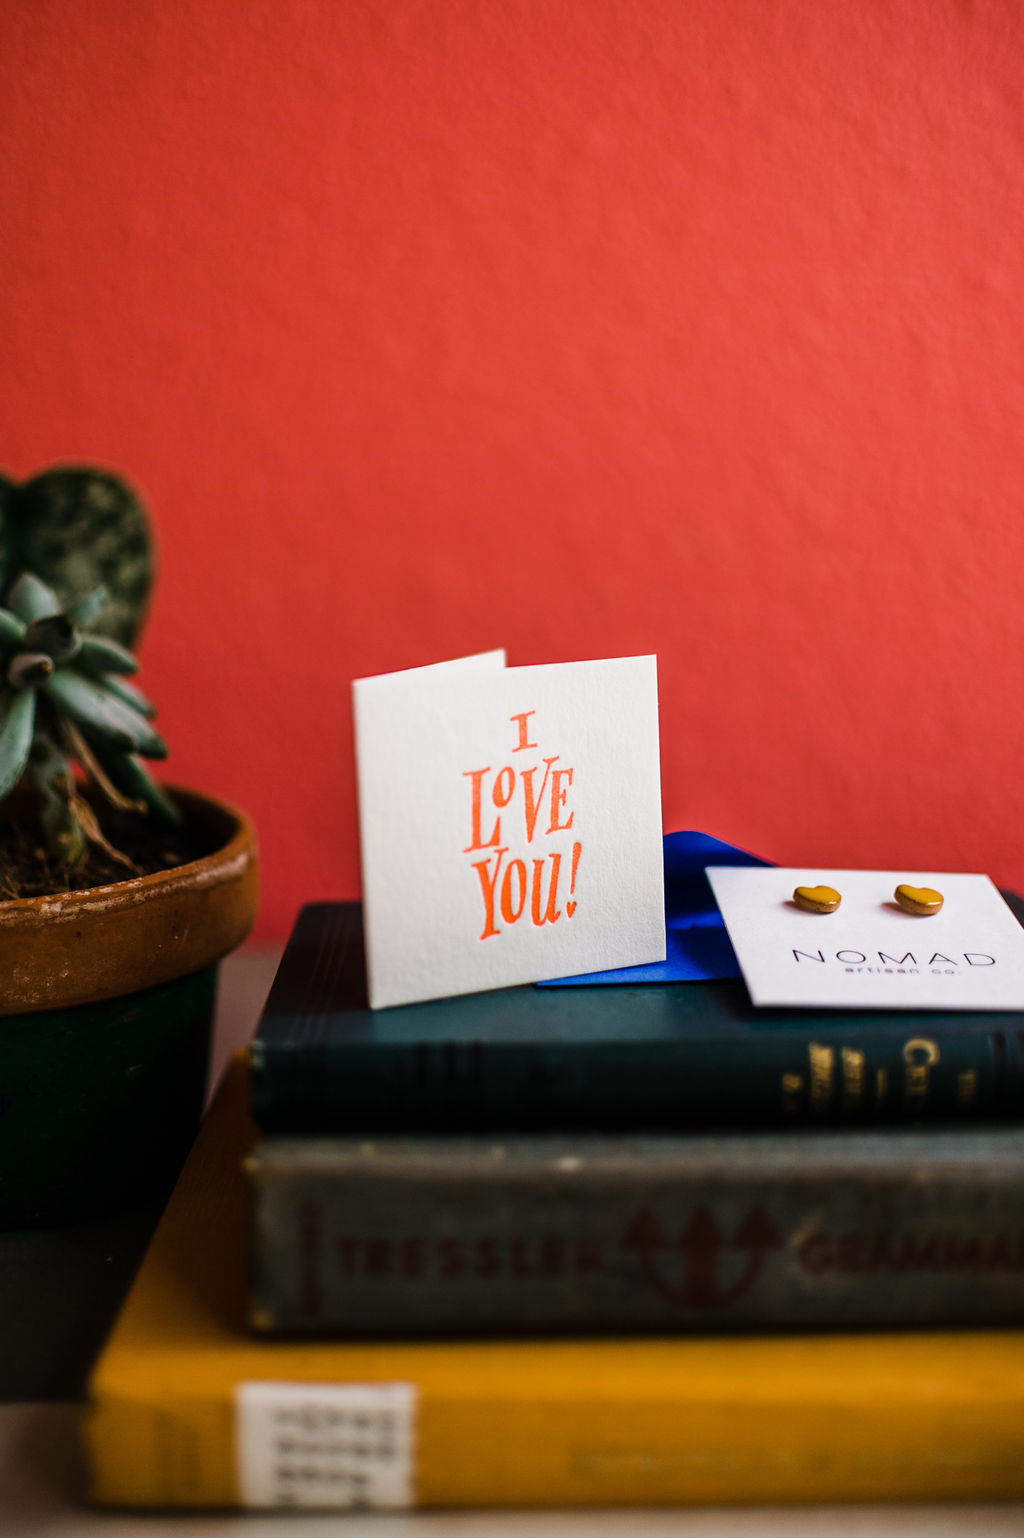 the design: i love you!   the size: 2.5" x 2.5"     hand letterpressed card packed in a cello sleeve with corresponding envelope blank inside  made in the USA letterpress. Ramble & Co. is a family owned business. Shop at shop.rambleandcompany.com or visit our store in Wichita Falls, Texas || small batch/ hand printed tees + fine art prints | your source of encouragement + inspiration.